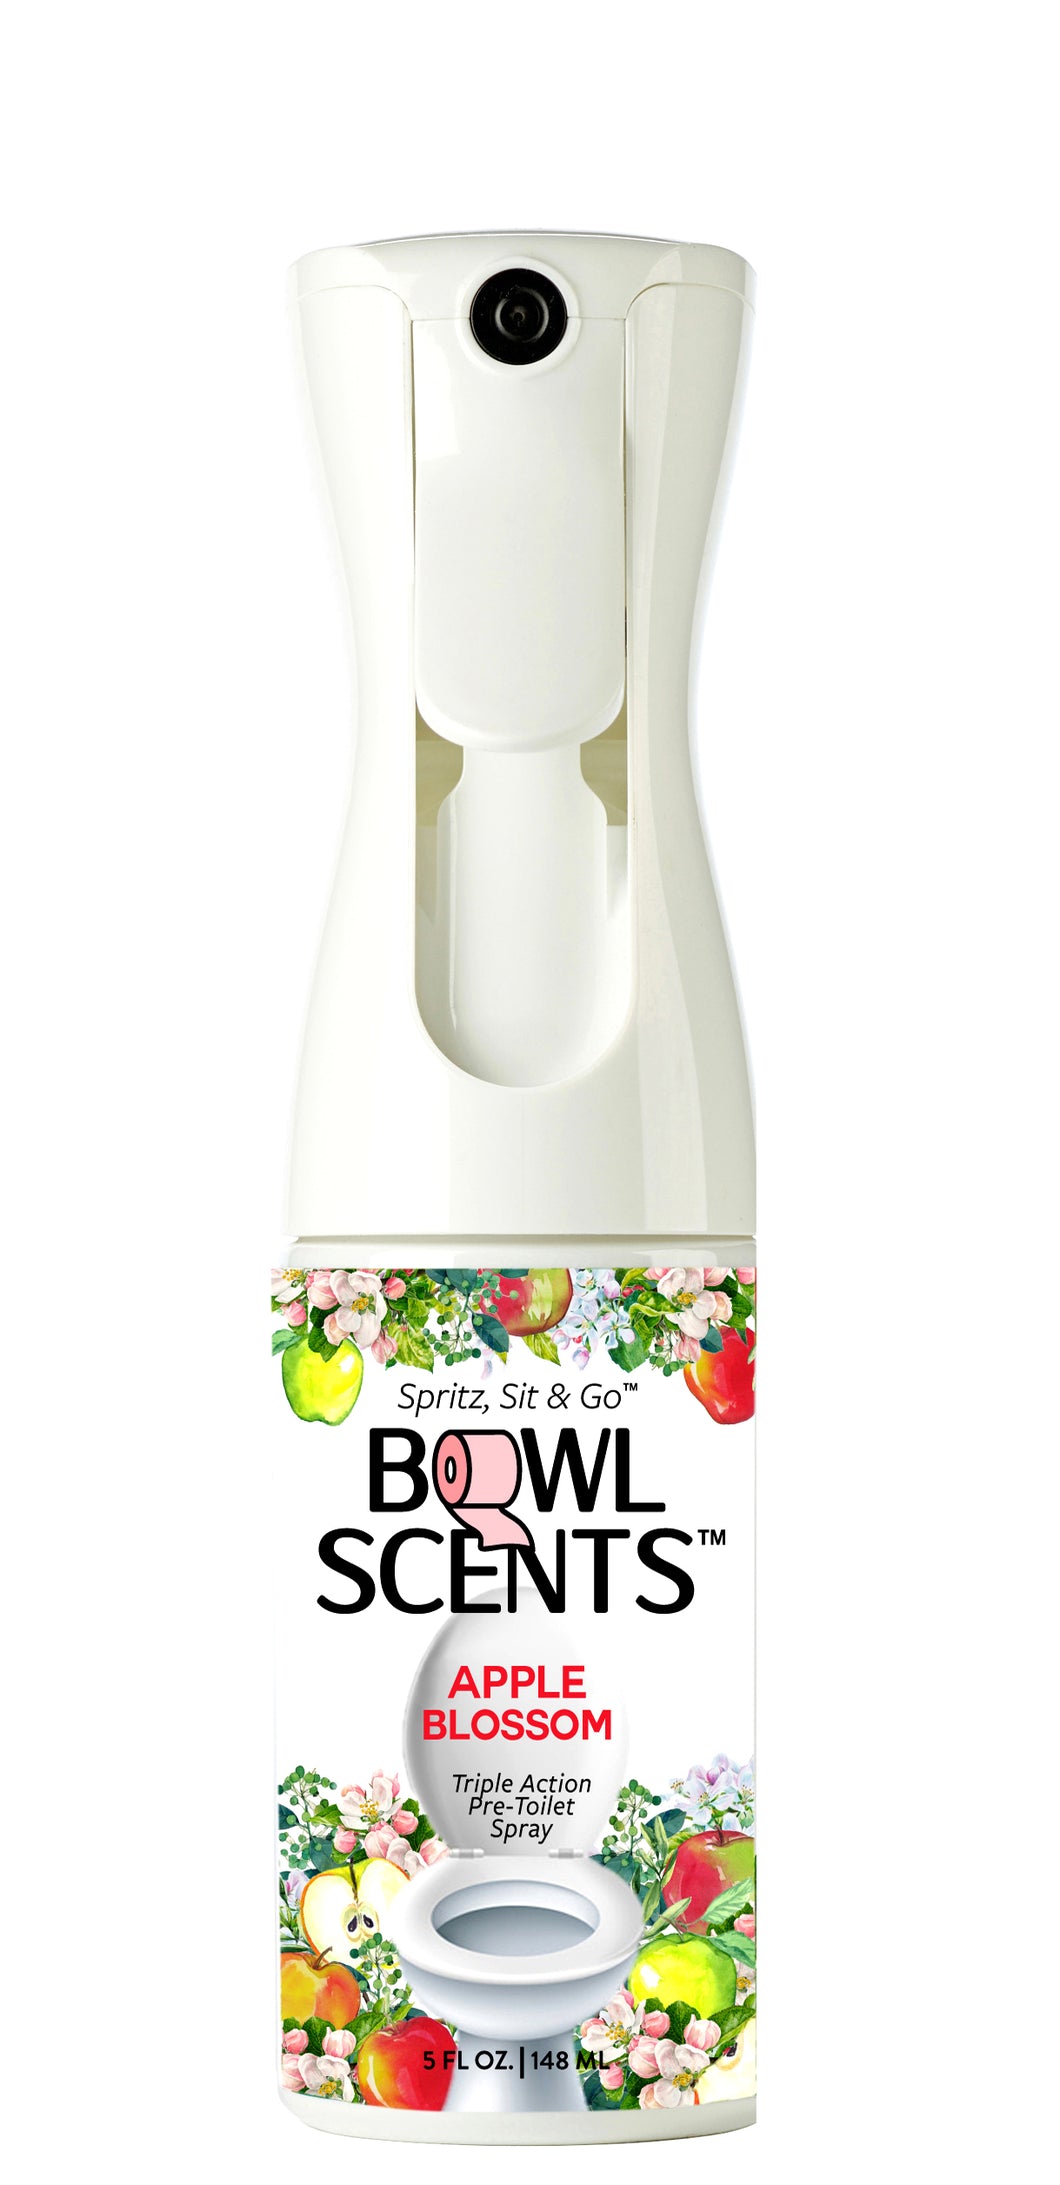 Bowl Scents Toilet Spray traps nasty poop smell in the bowl. Now use any bathroom with confidence - No more waiting to get home - Made in USA